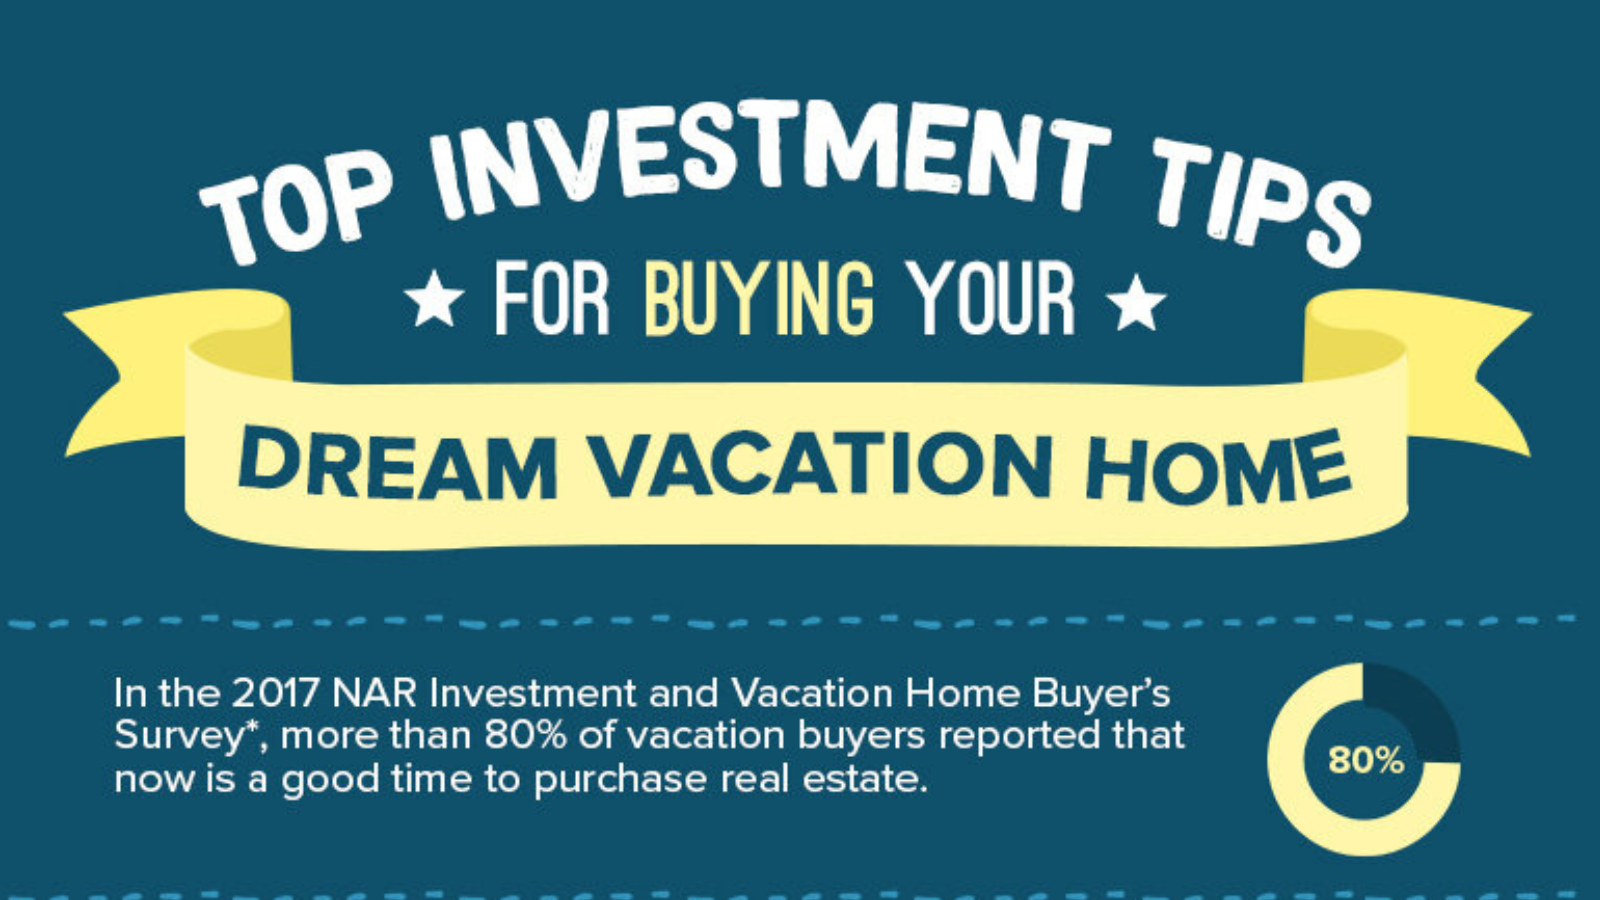 Top Investment Tips for Buying Your Dream Vacation Home